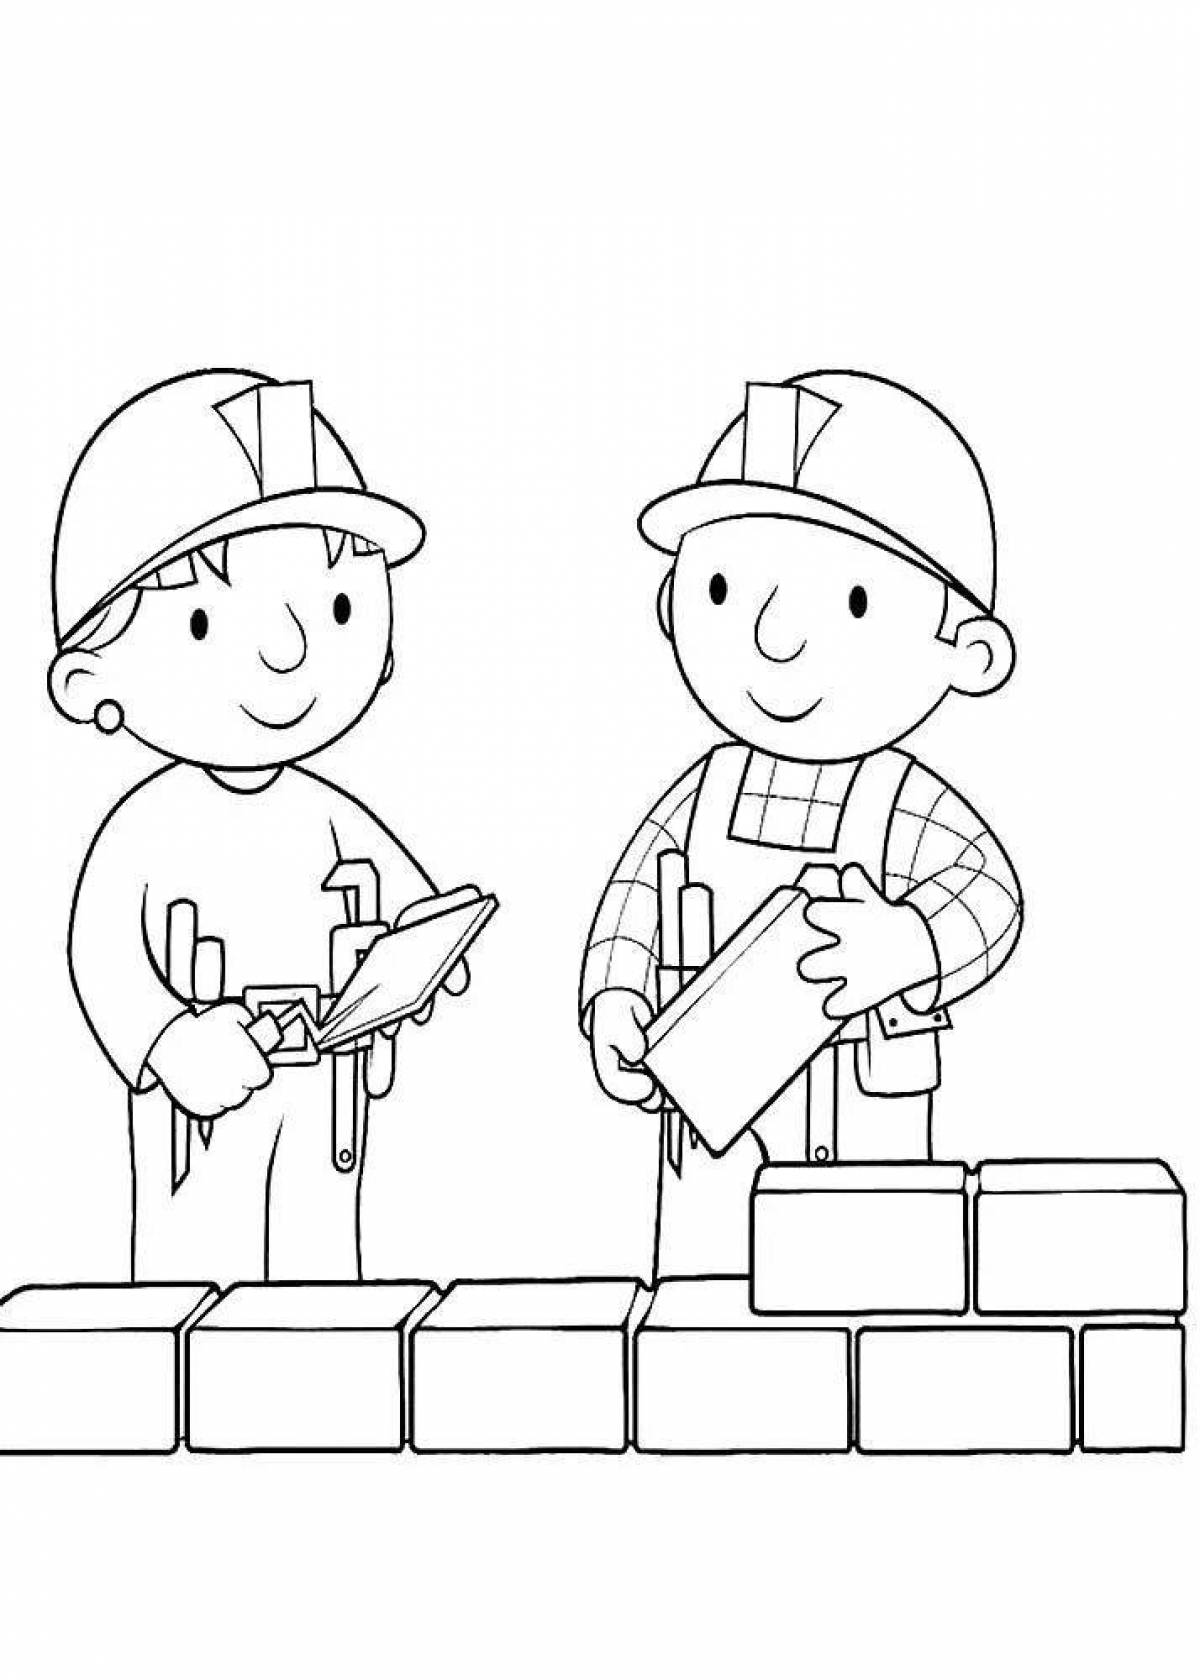 Occupational health and safety coloring book